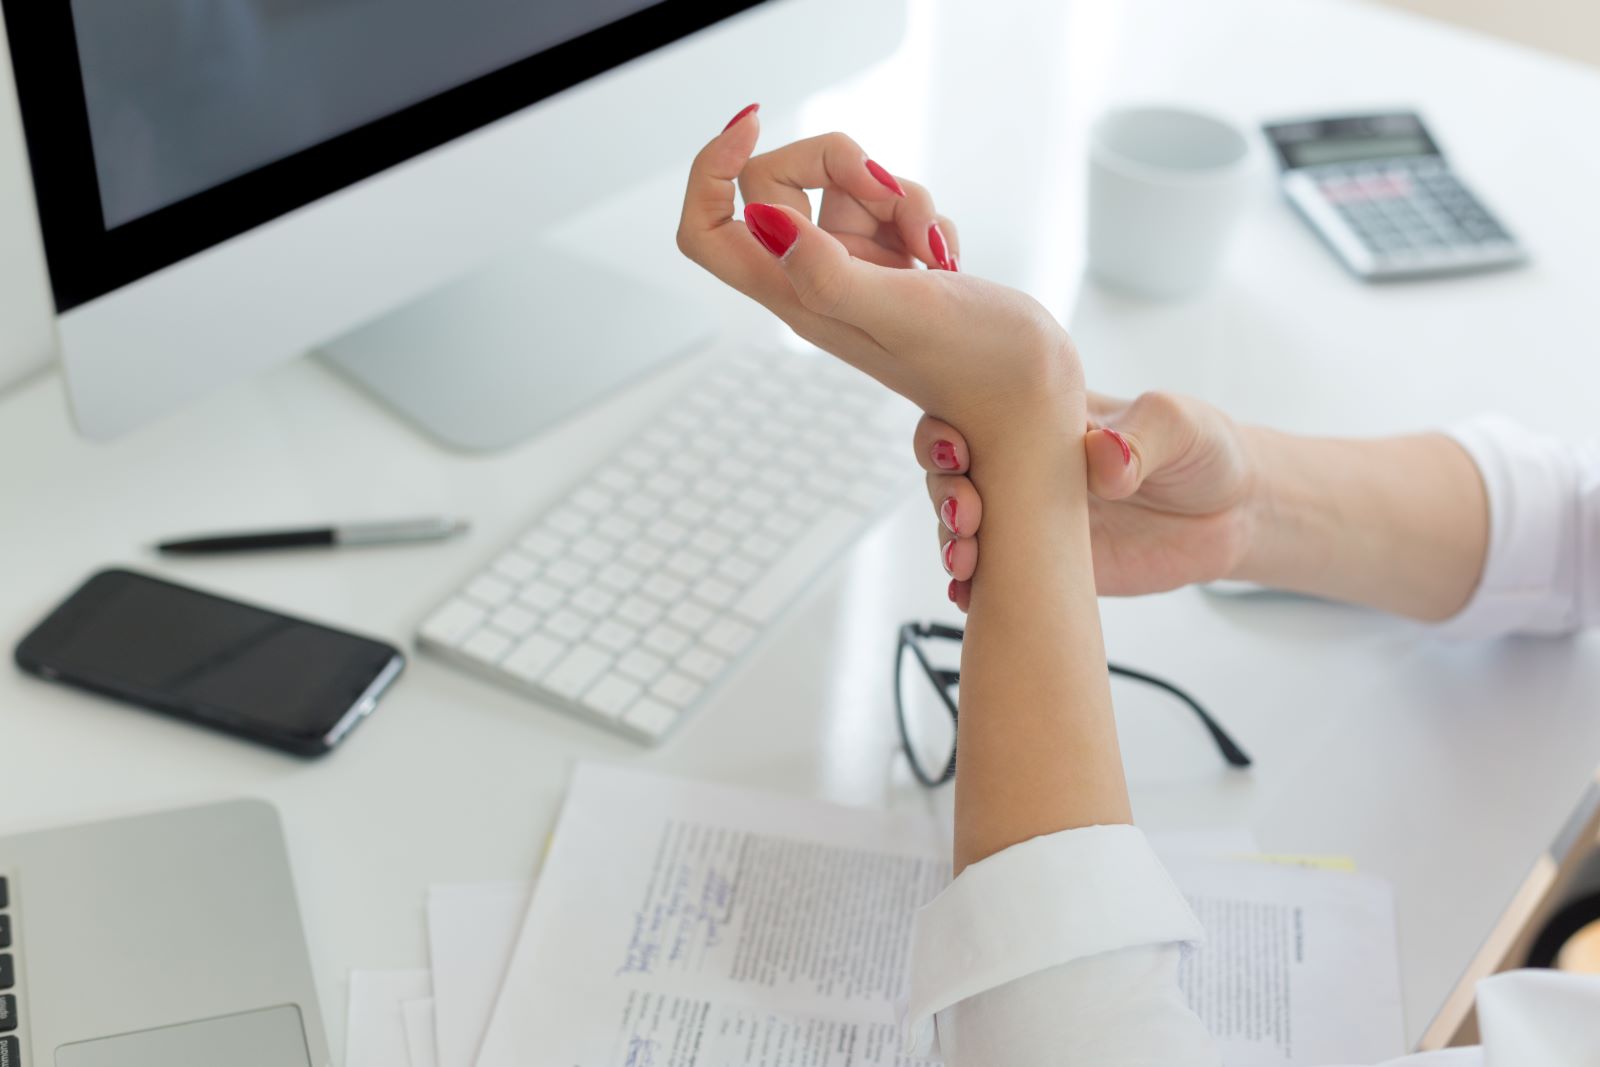 Have a Desk Job? Don’t Ignore These Signs of Hand or Wrist Injury